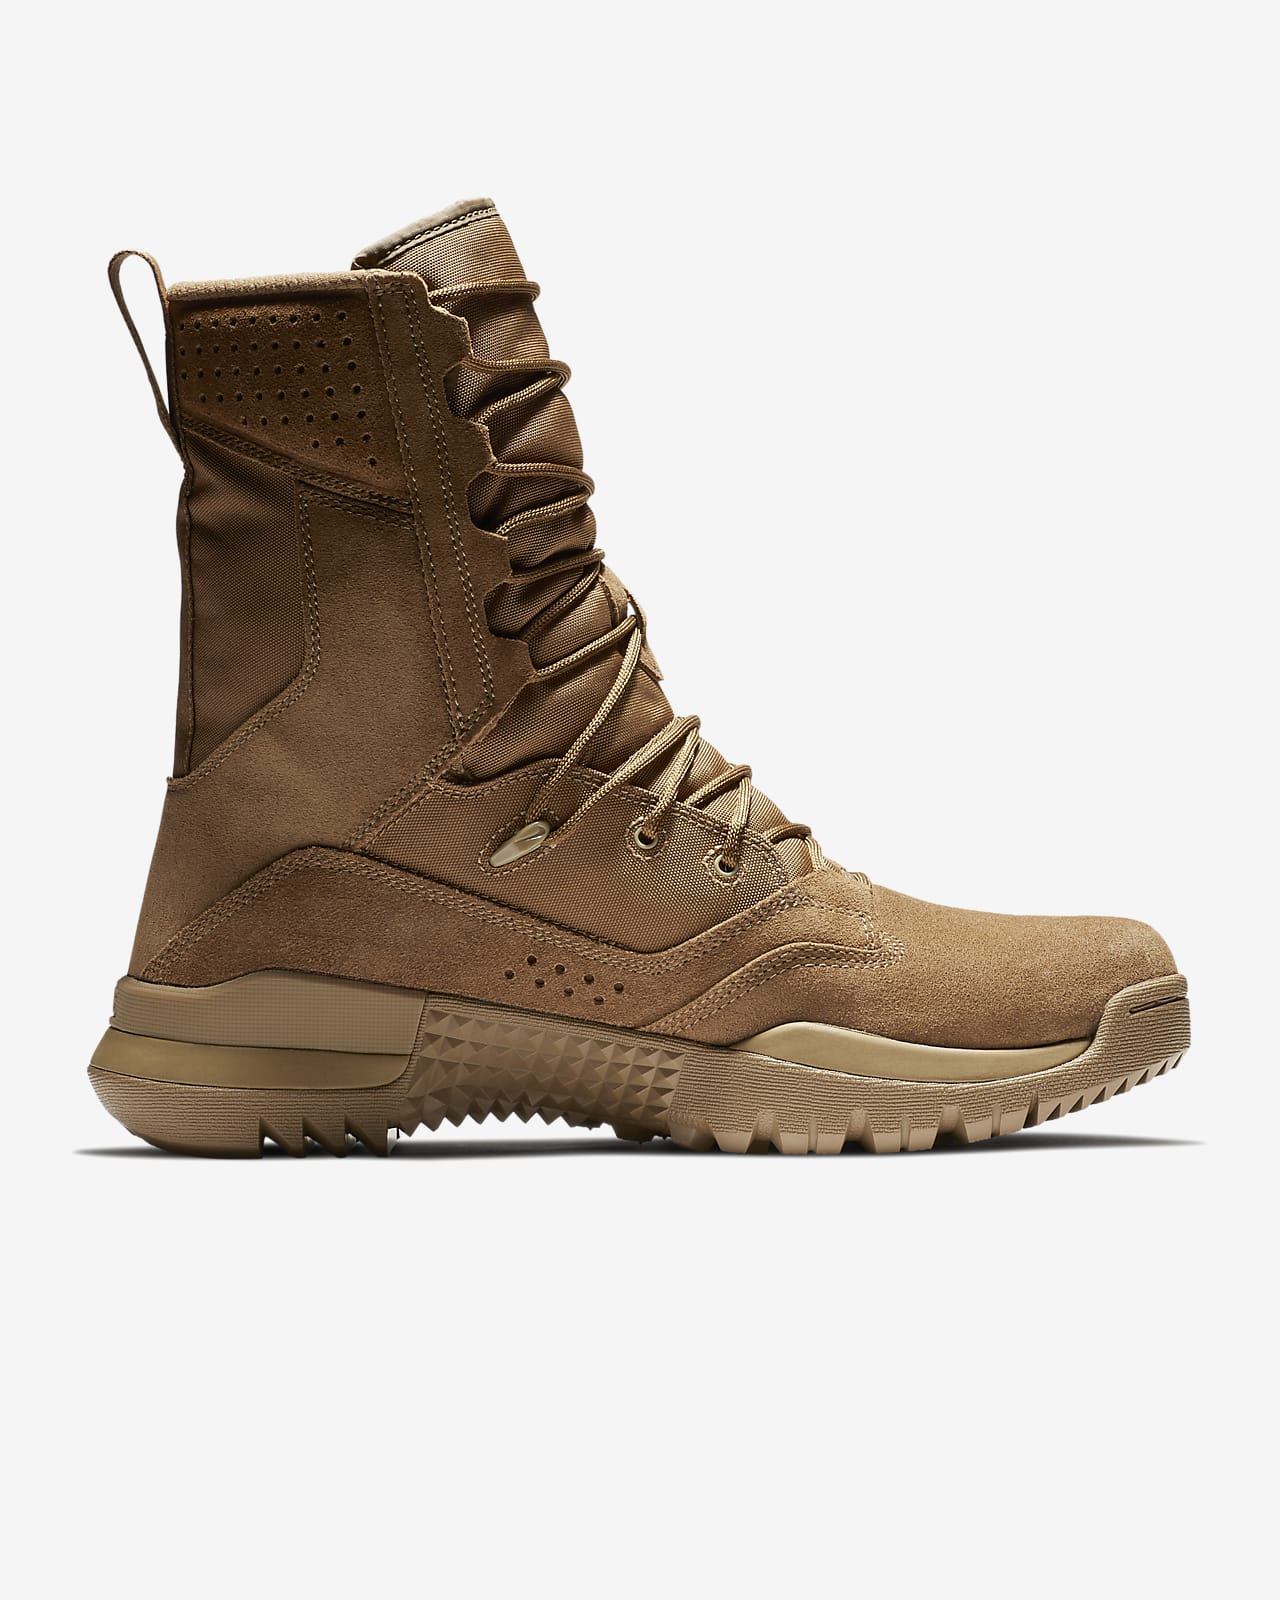 nike women's tactical boots